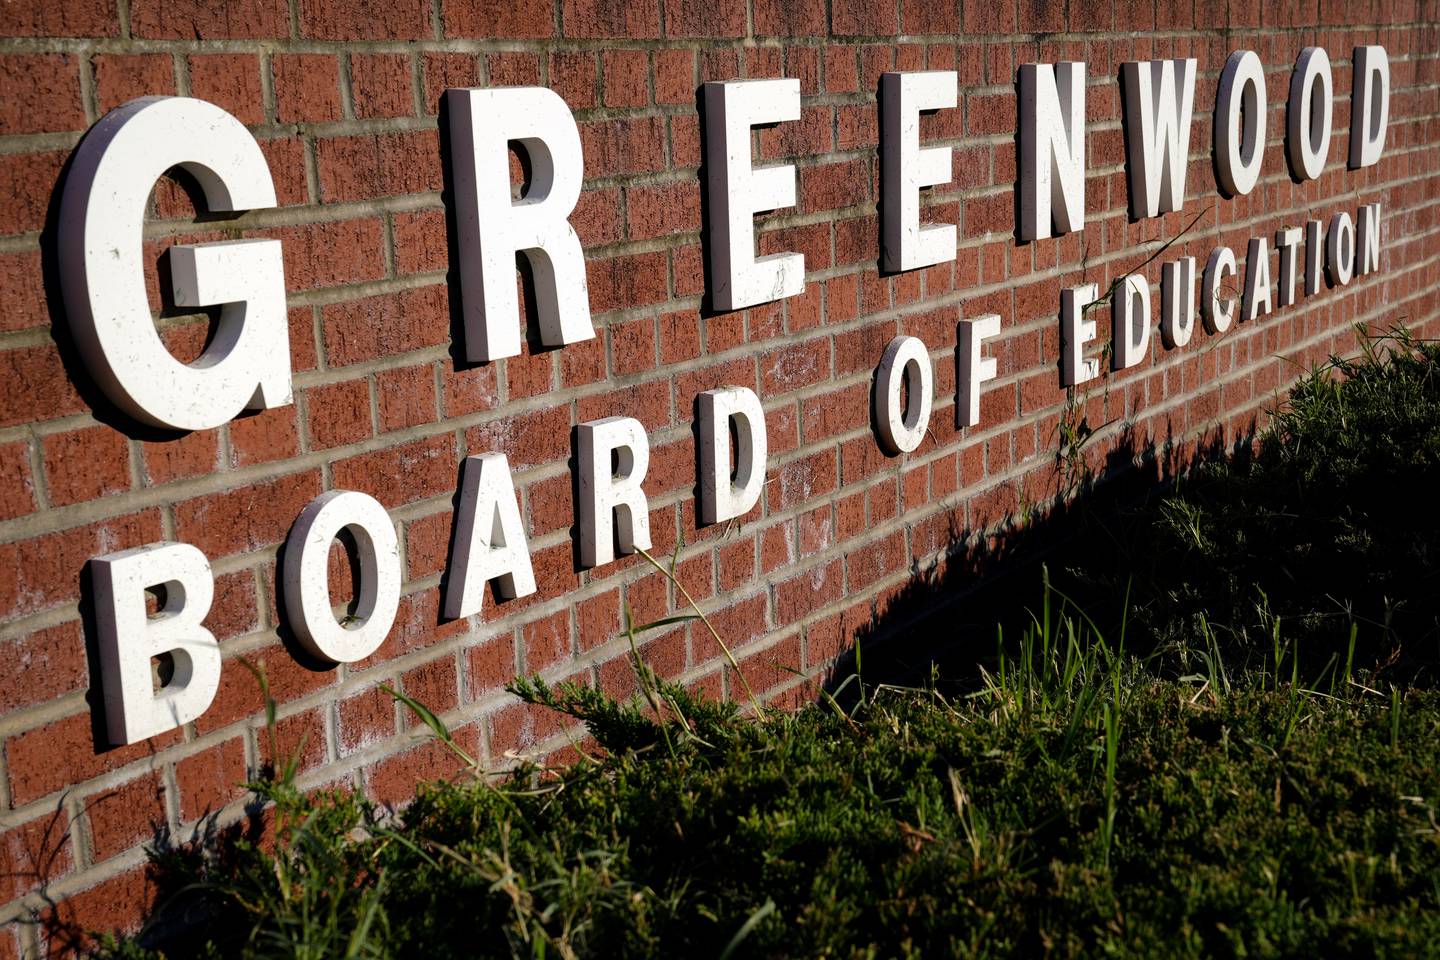 The sign near the entrance to the Baltimore County Board of Education’s Greenwood Campus on 8/18/22.